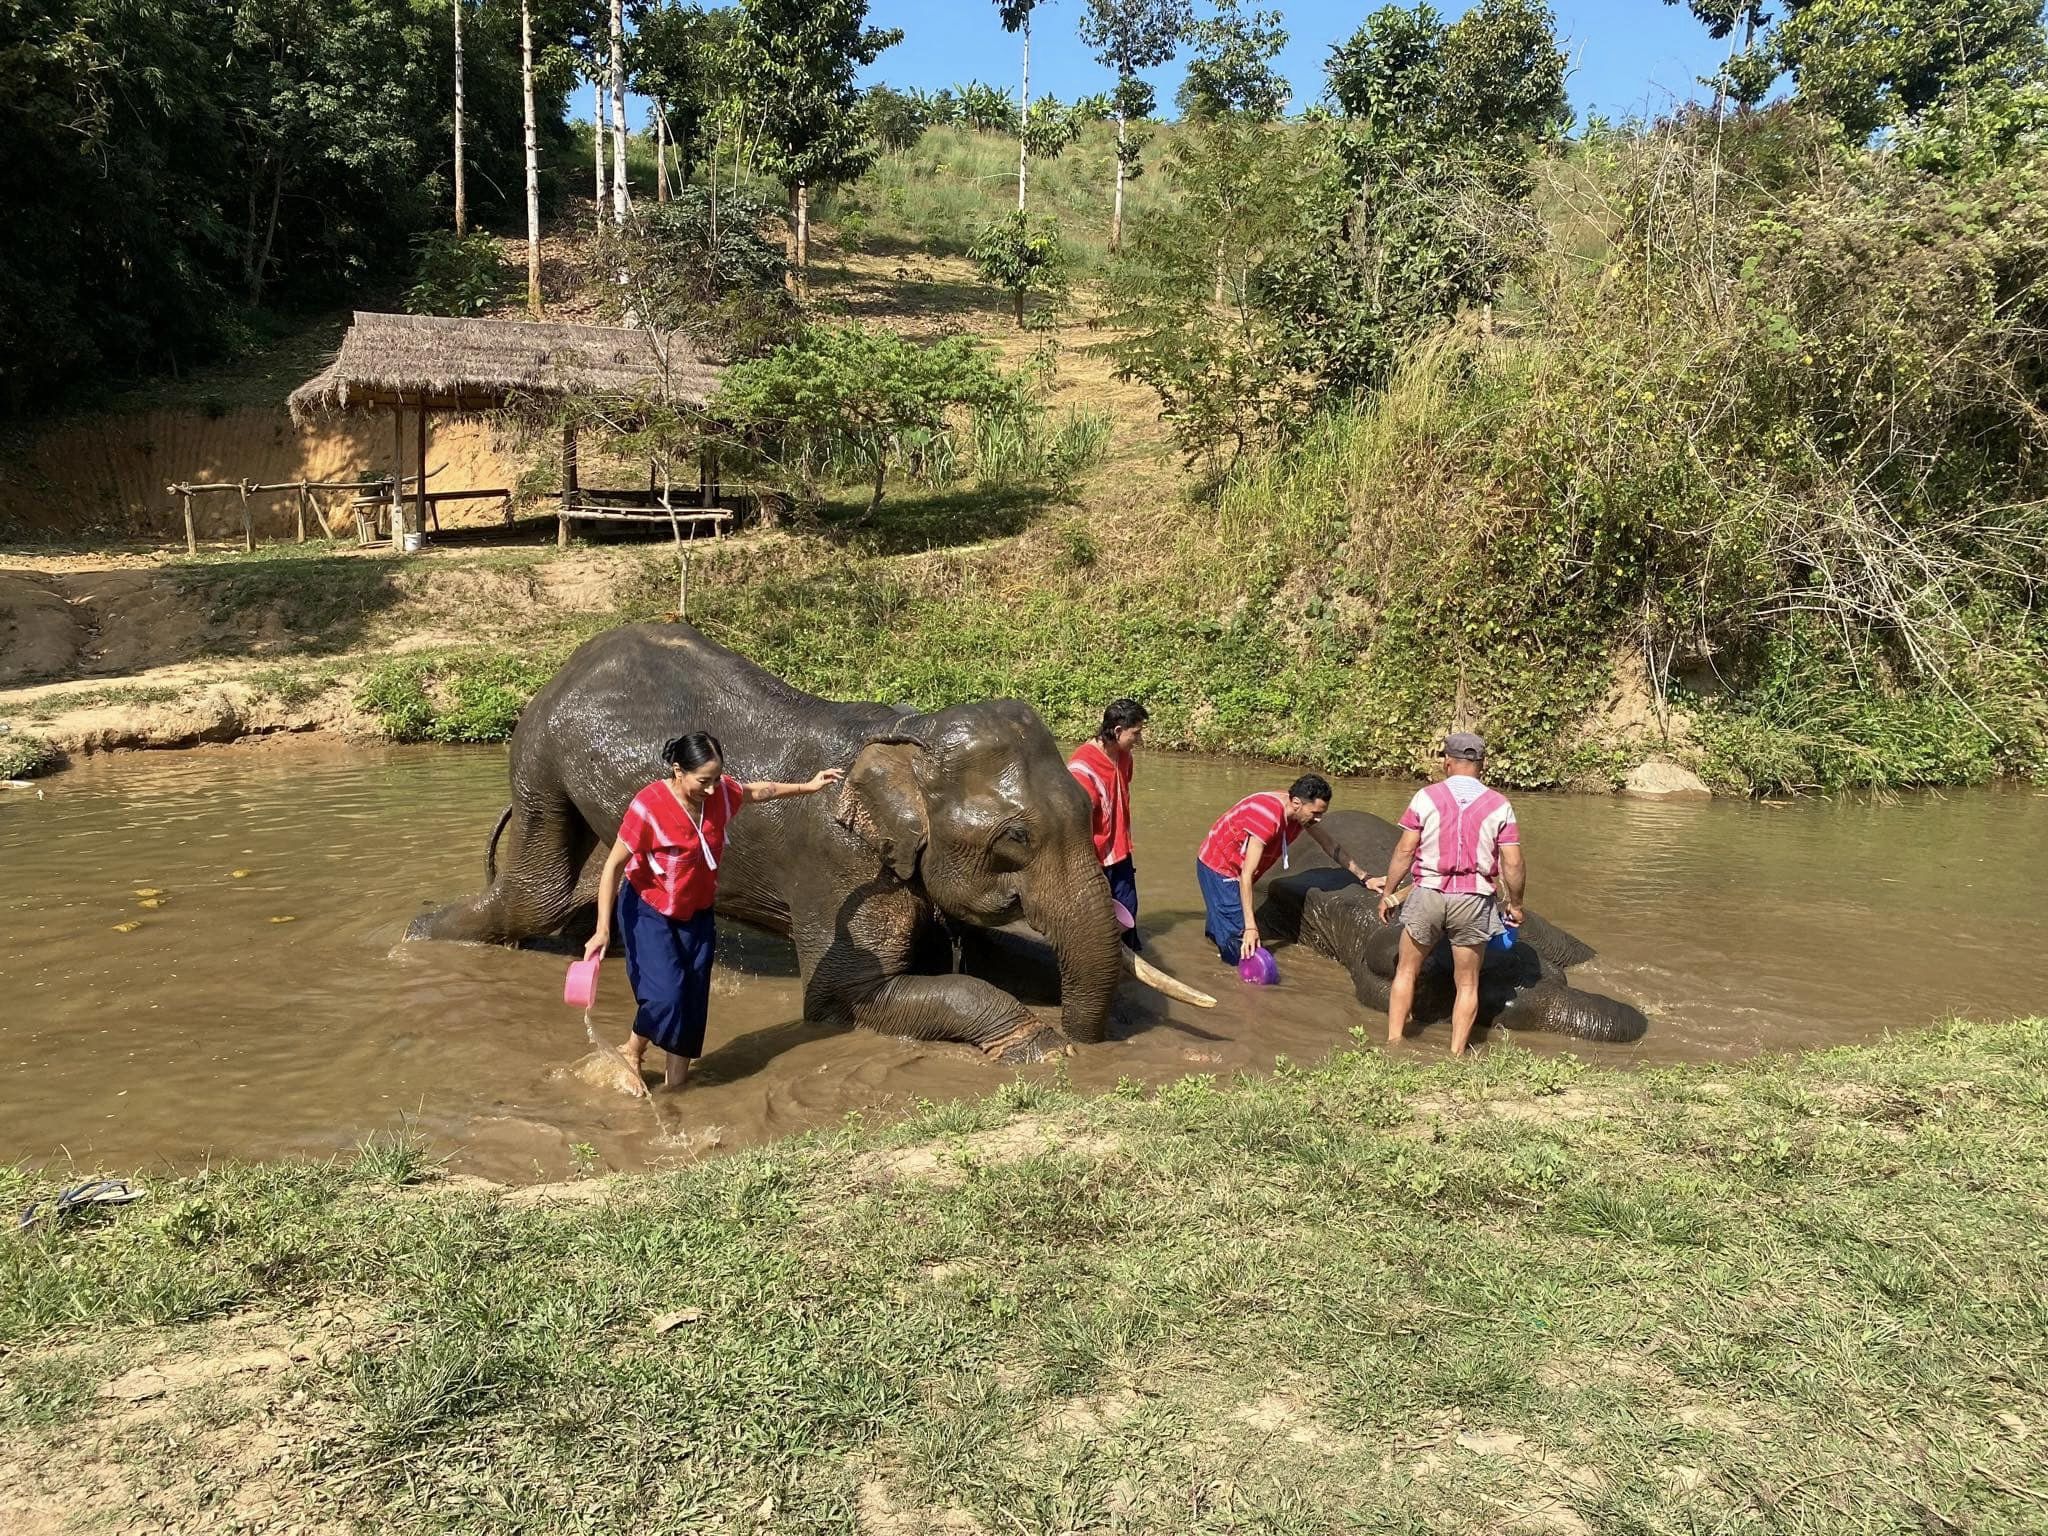 ethical encounter with elephants in chiang rai